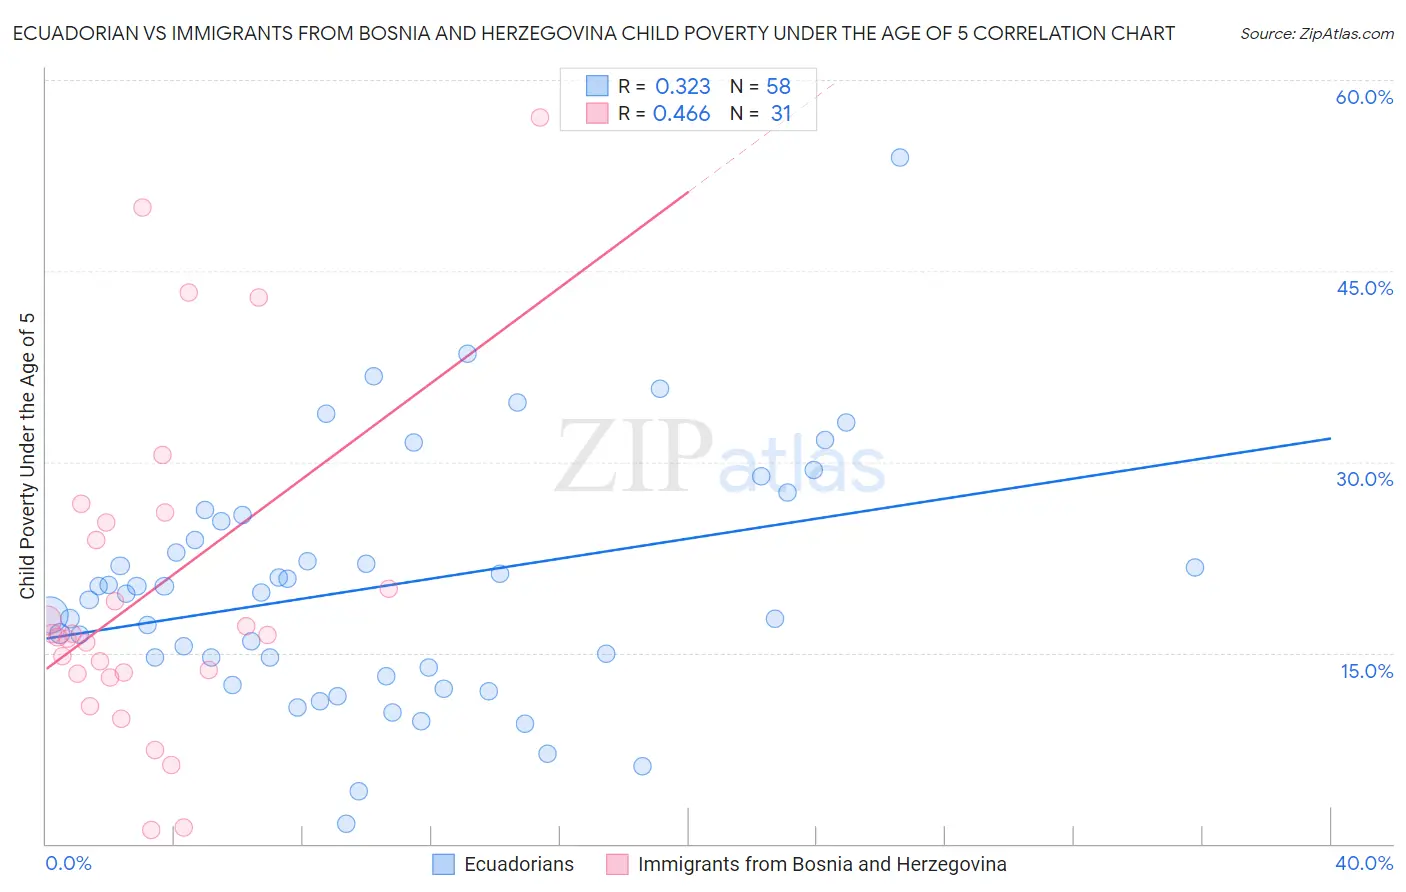 Ecuadorian vs Immigrants from Bosnia and Herzegovina Child Poverty Under the Age of 5